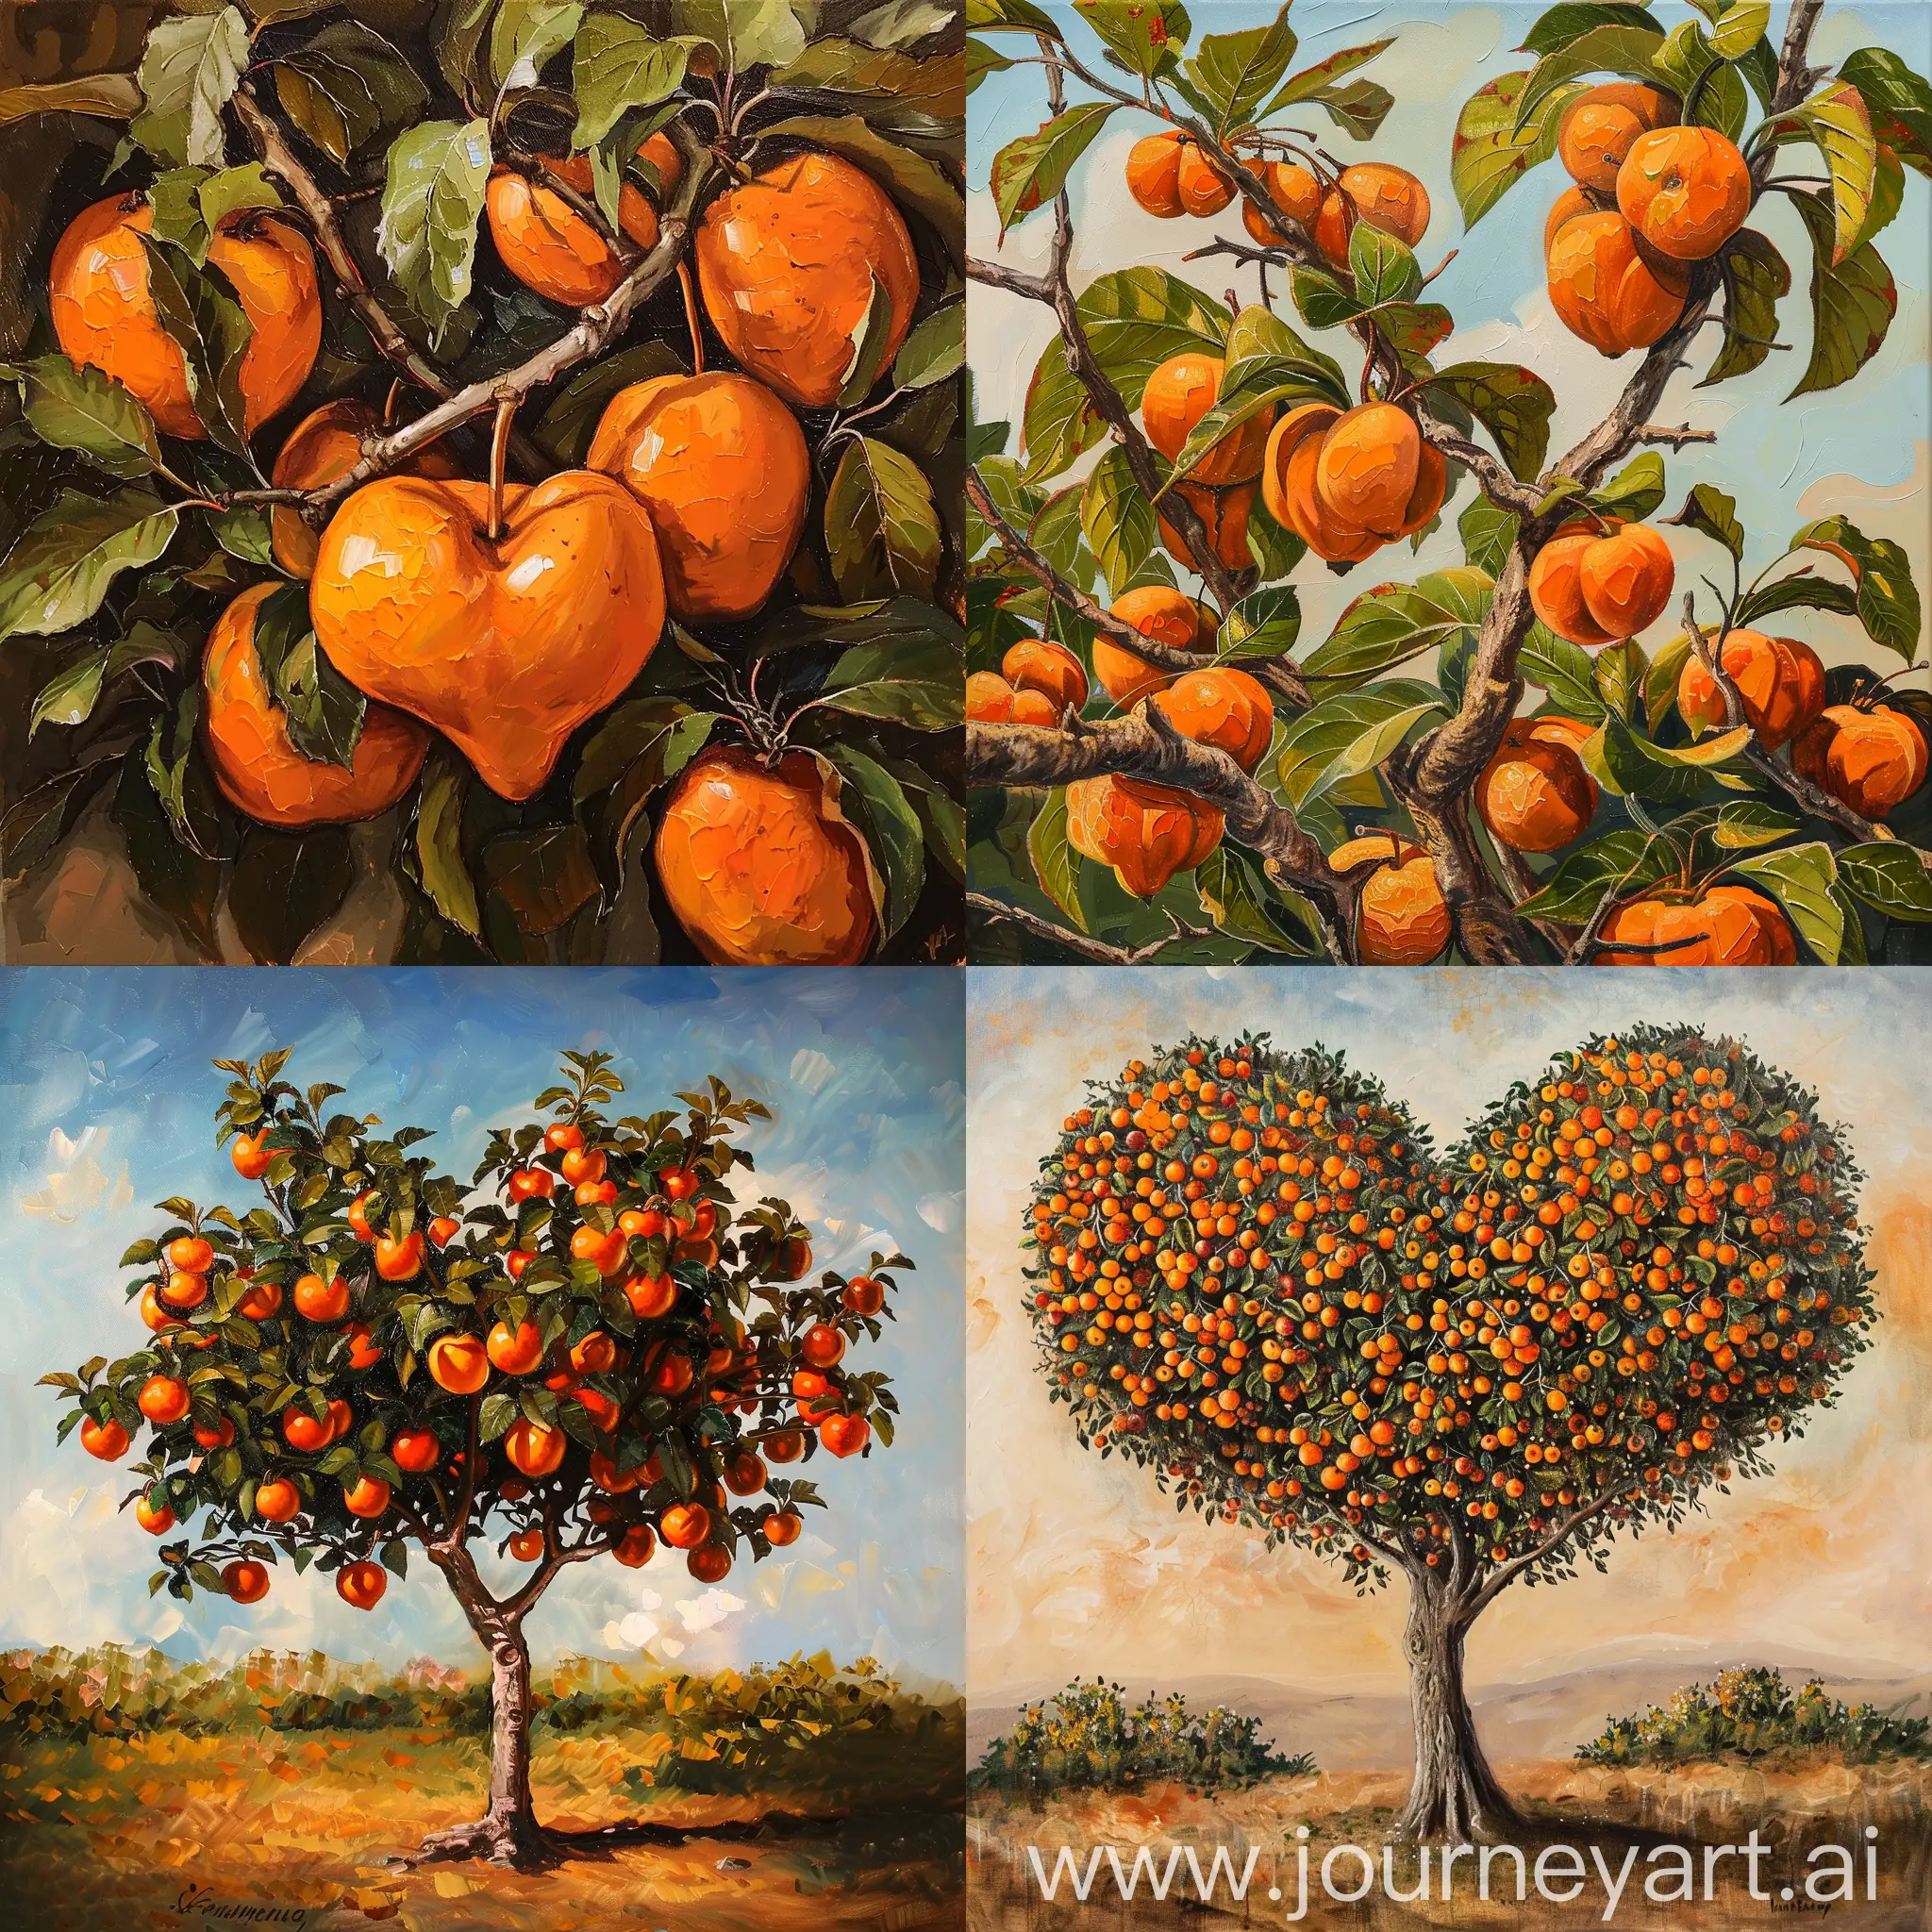 Persimmon-Tree-in-Oil-Painting-Style-Auspicious-Symbolism